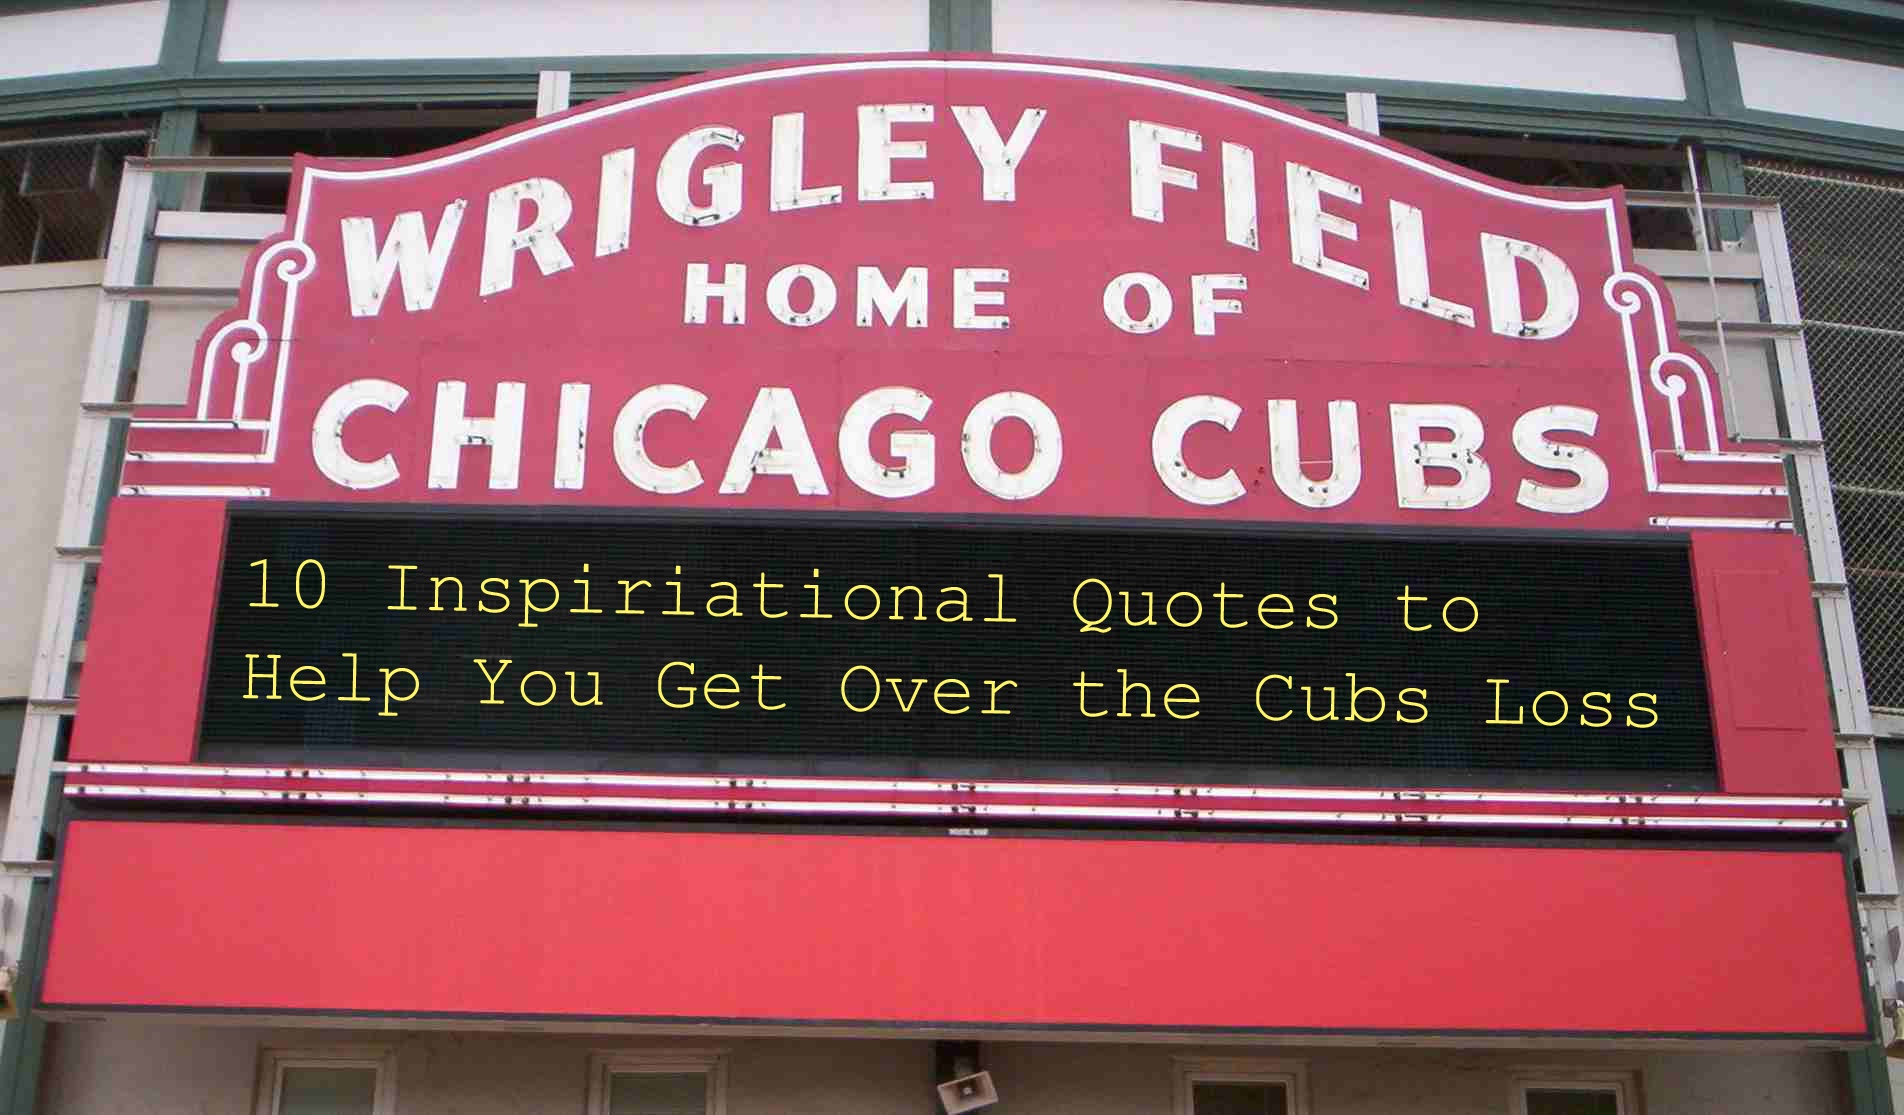 10 Inspirational Quotes To Help You Get Over The Cubs Loss [SlideShare]